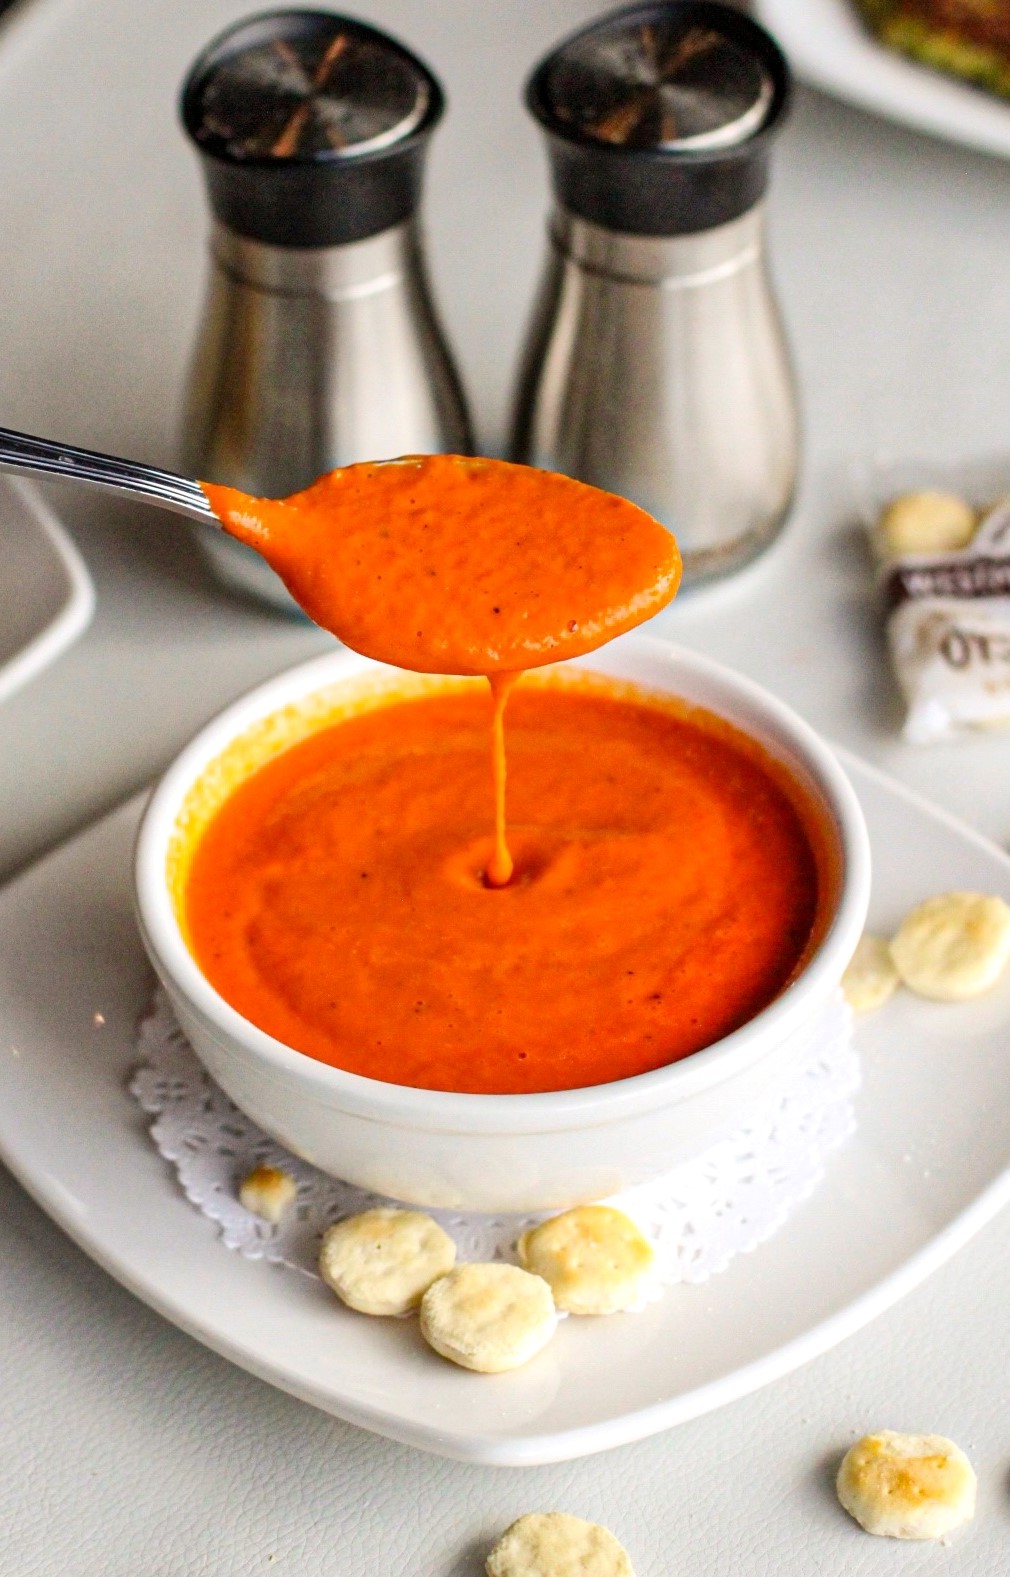 barnone tomato bisque with oyster crackers around it